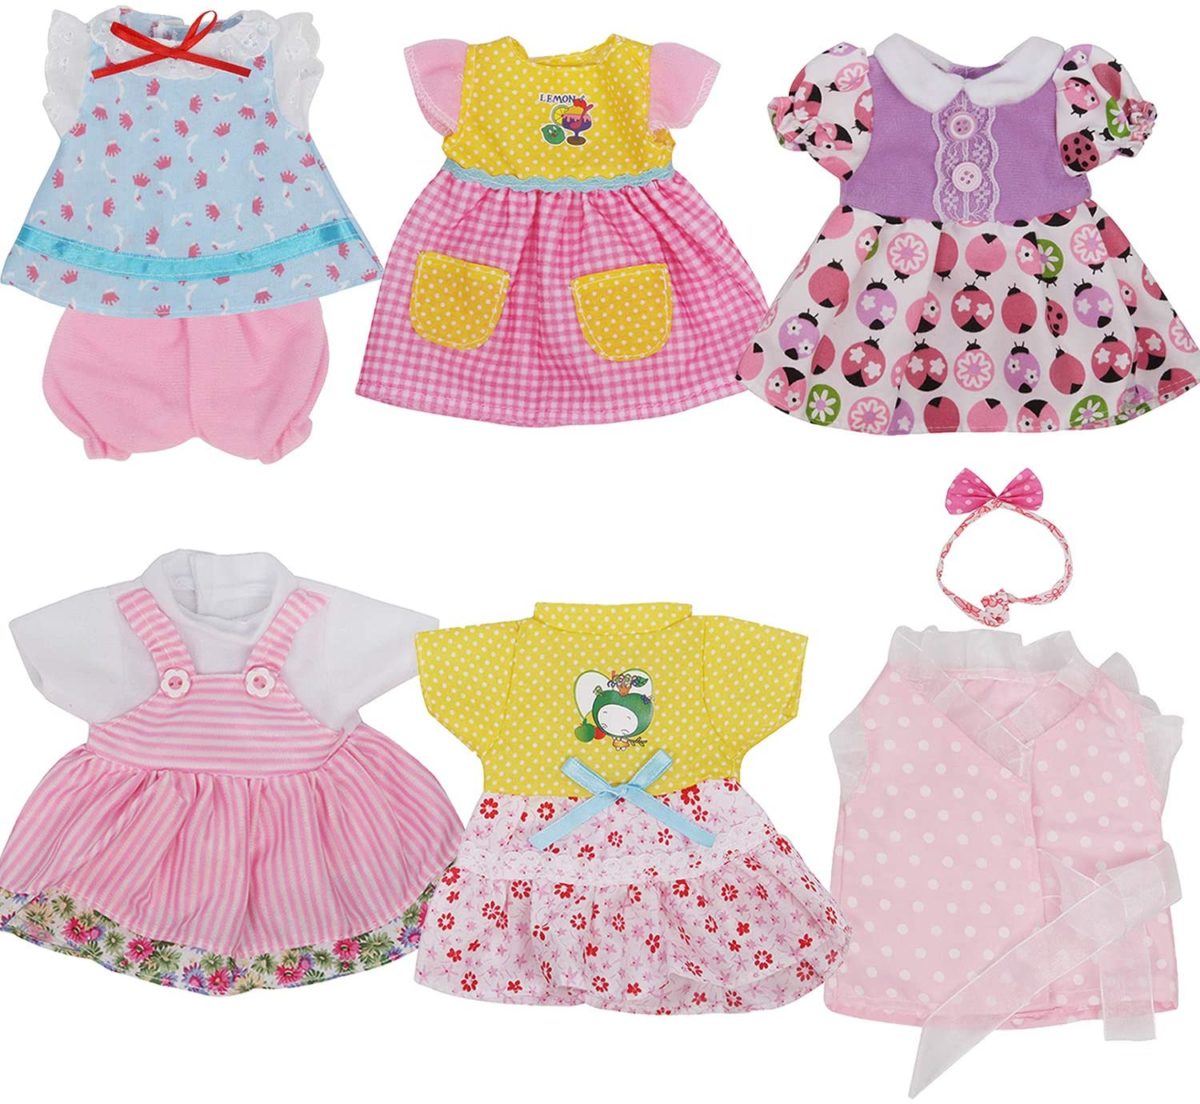 Baby Alive Clothes That Your Kid Will Love